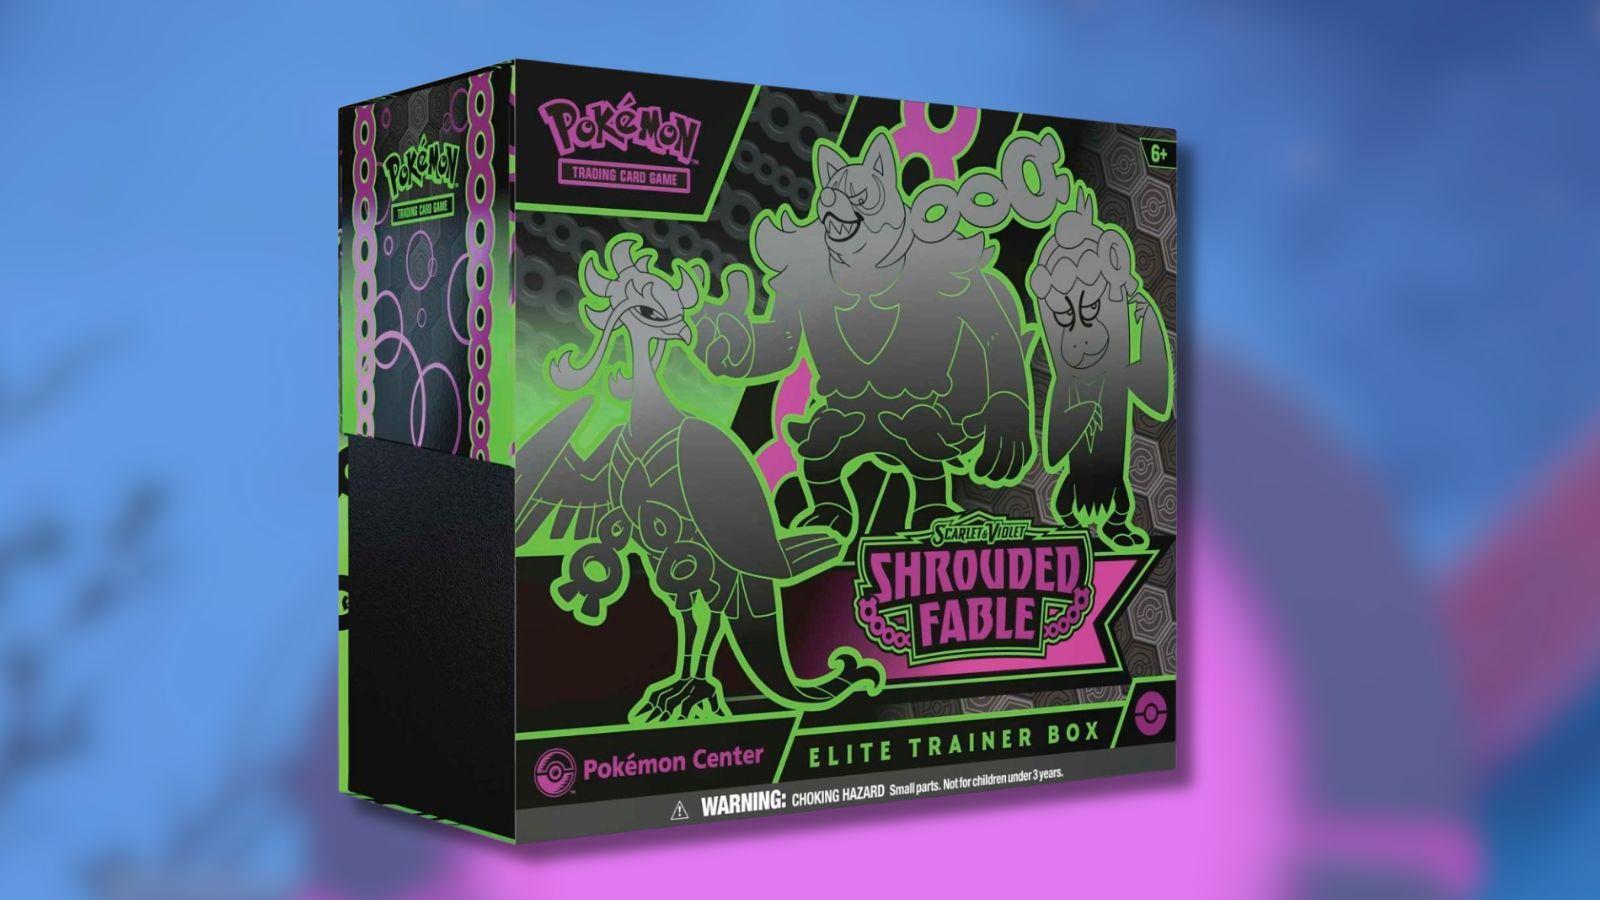 Shrouded Fable Elite Trainer Box with Pecharunt Pokemon in the background.